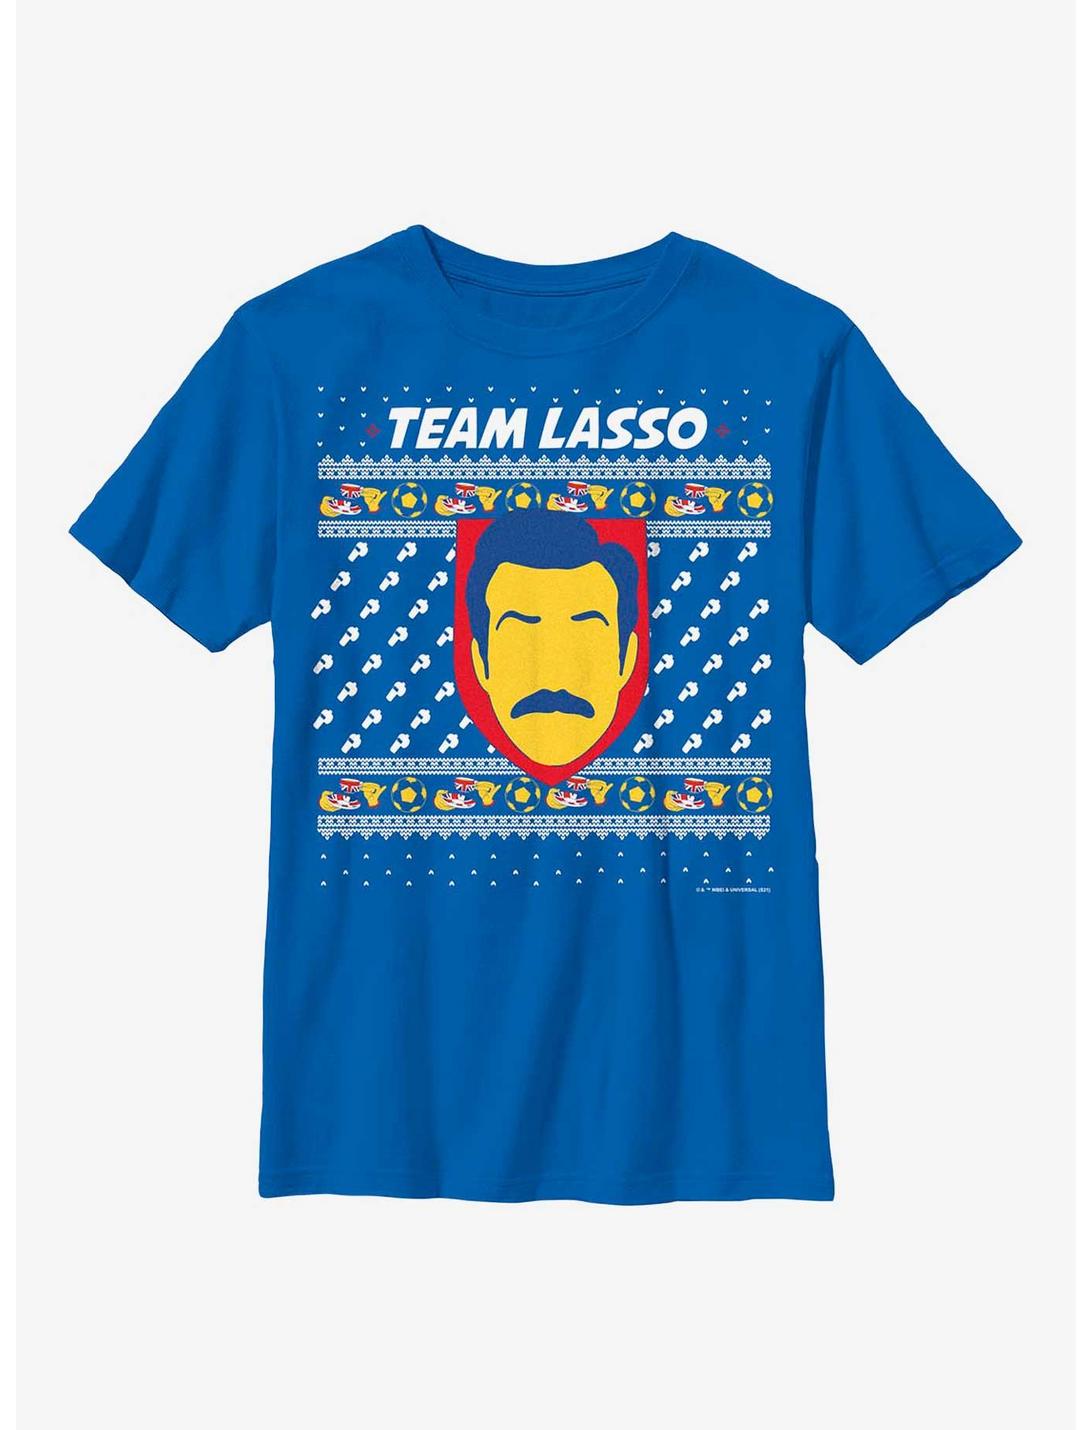 Plus Size Ted Lasso Team Lasso Ugly Sweater Youth T-Shirt, ROYAL, hi-res